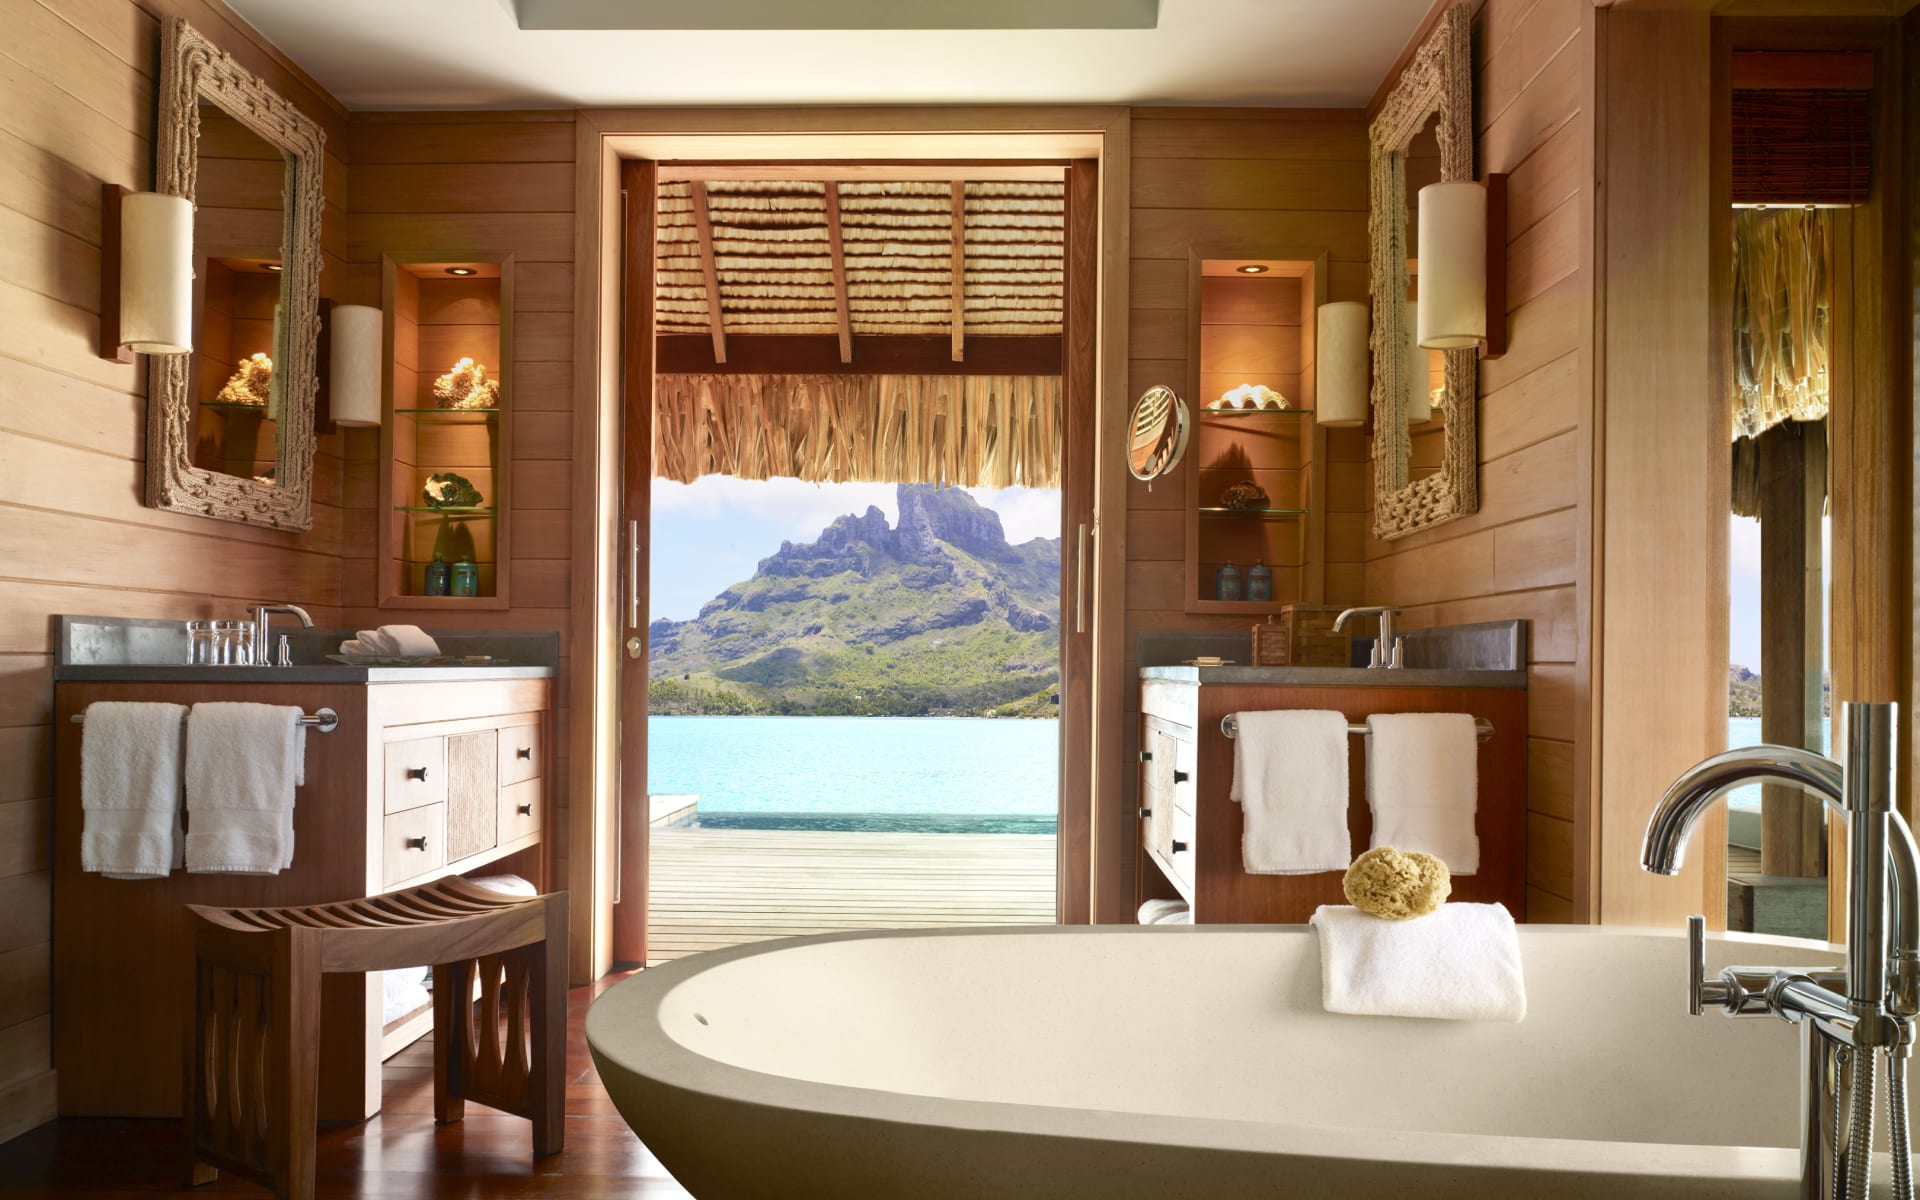 Mountain and ocean view from bath tub